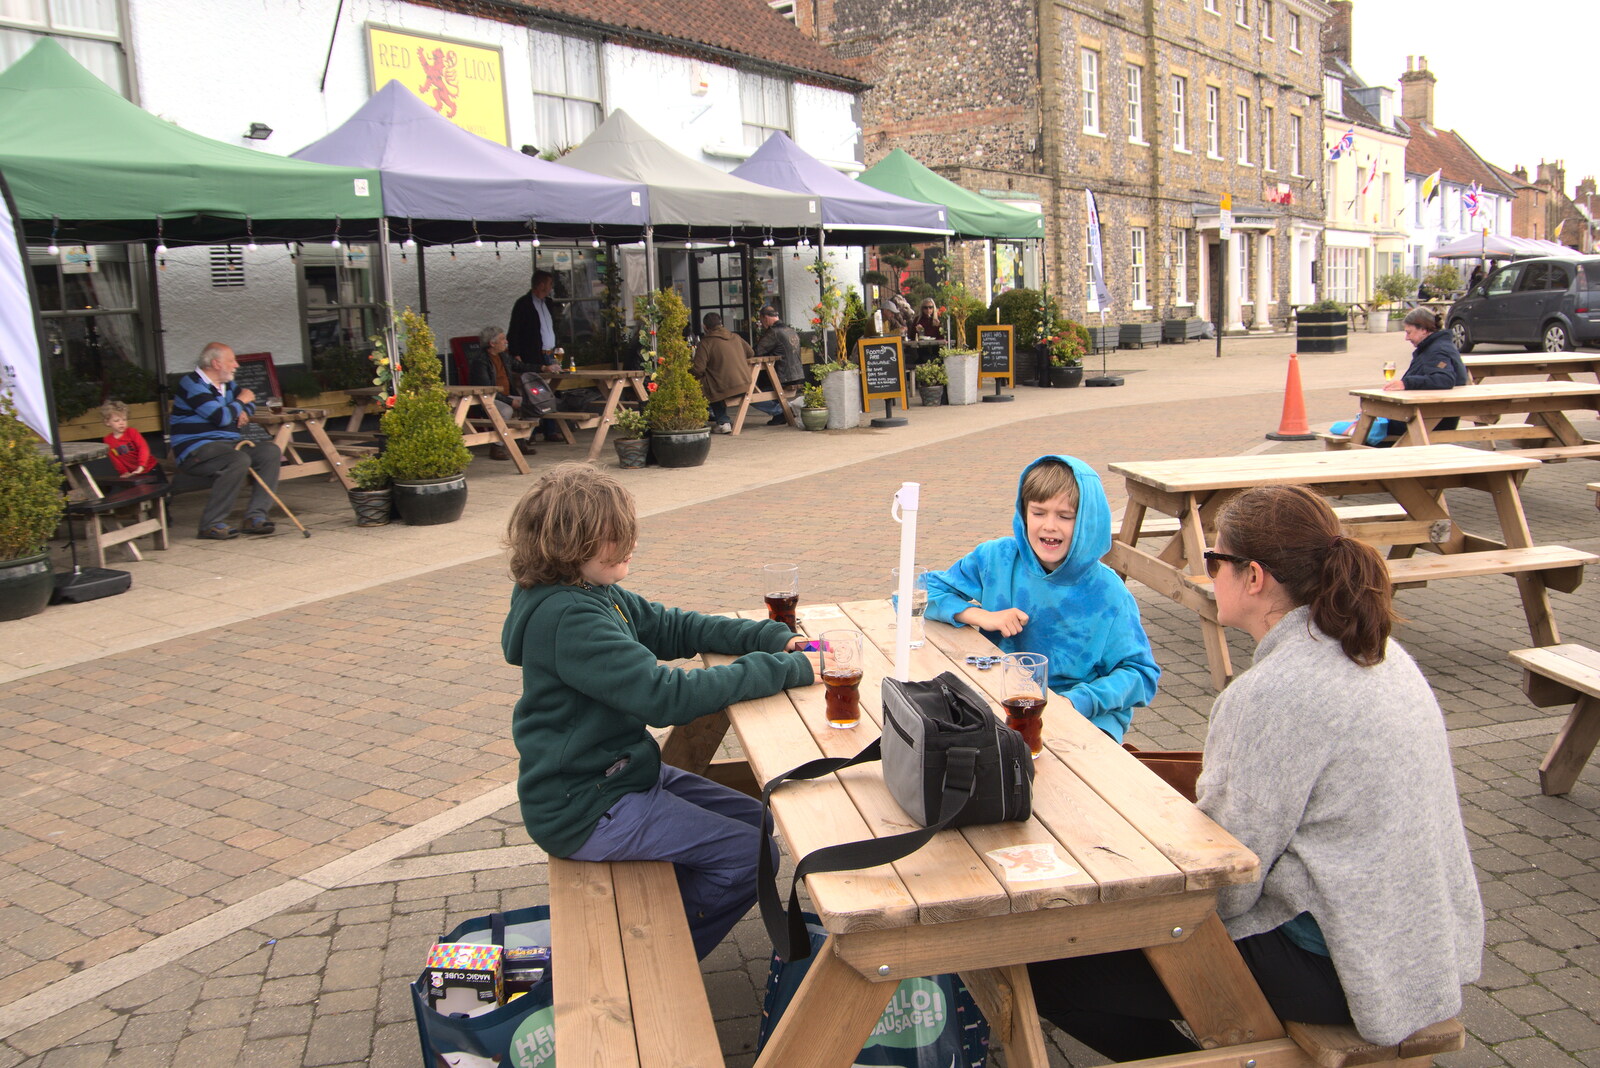 Outside the Red Lion, our lunch pub from A Vaccination Afternoon, Swaffham, Norfolk - 9th May 2021